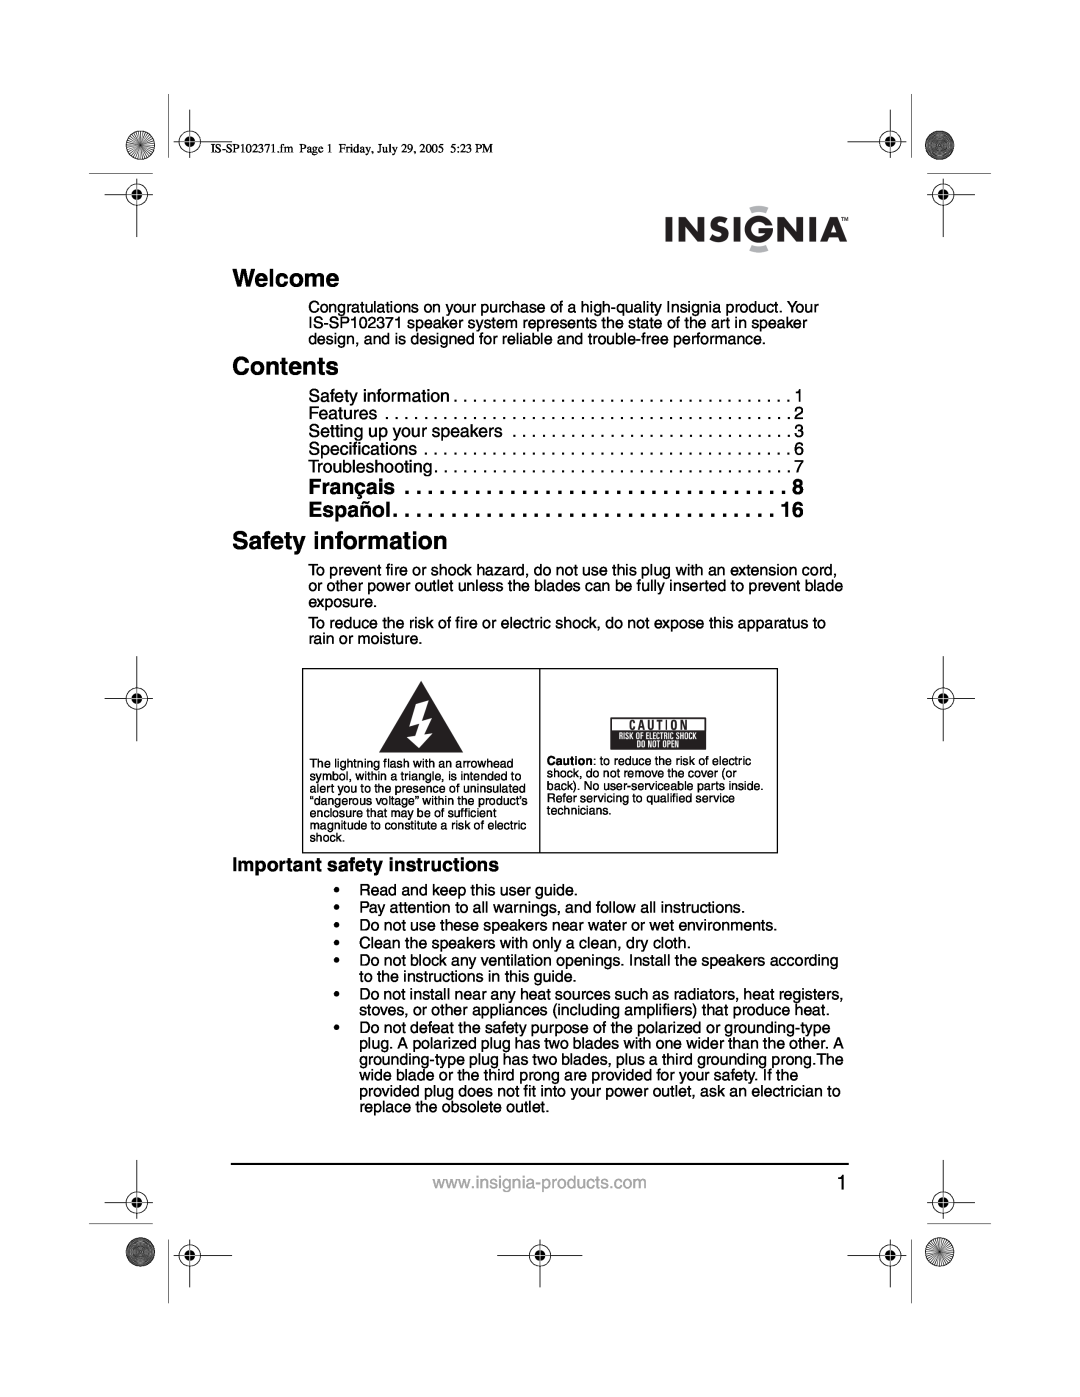 Insignia IS-SP102371 manual Welcome, Contents, Safety information, Important safety instructions 